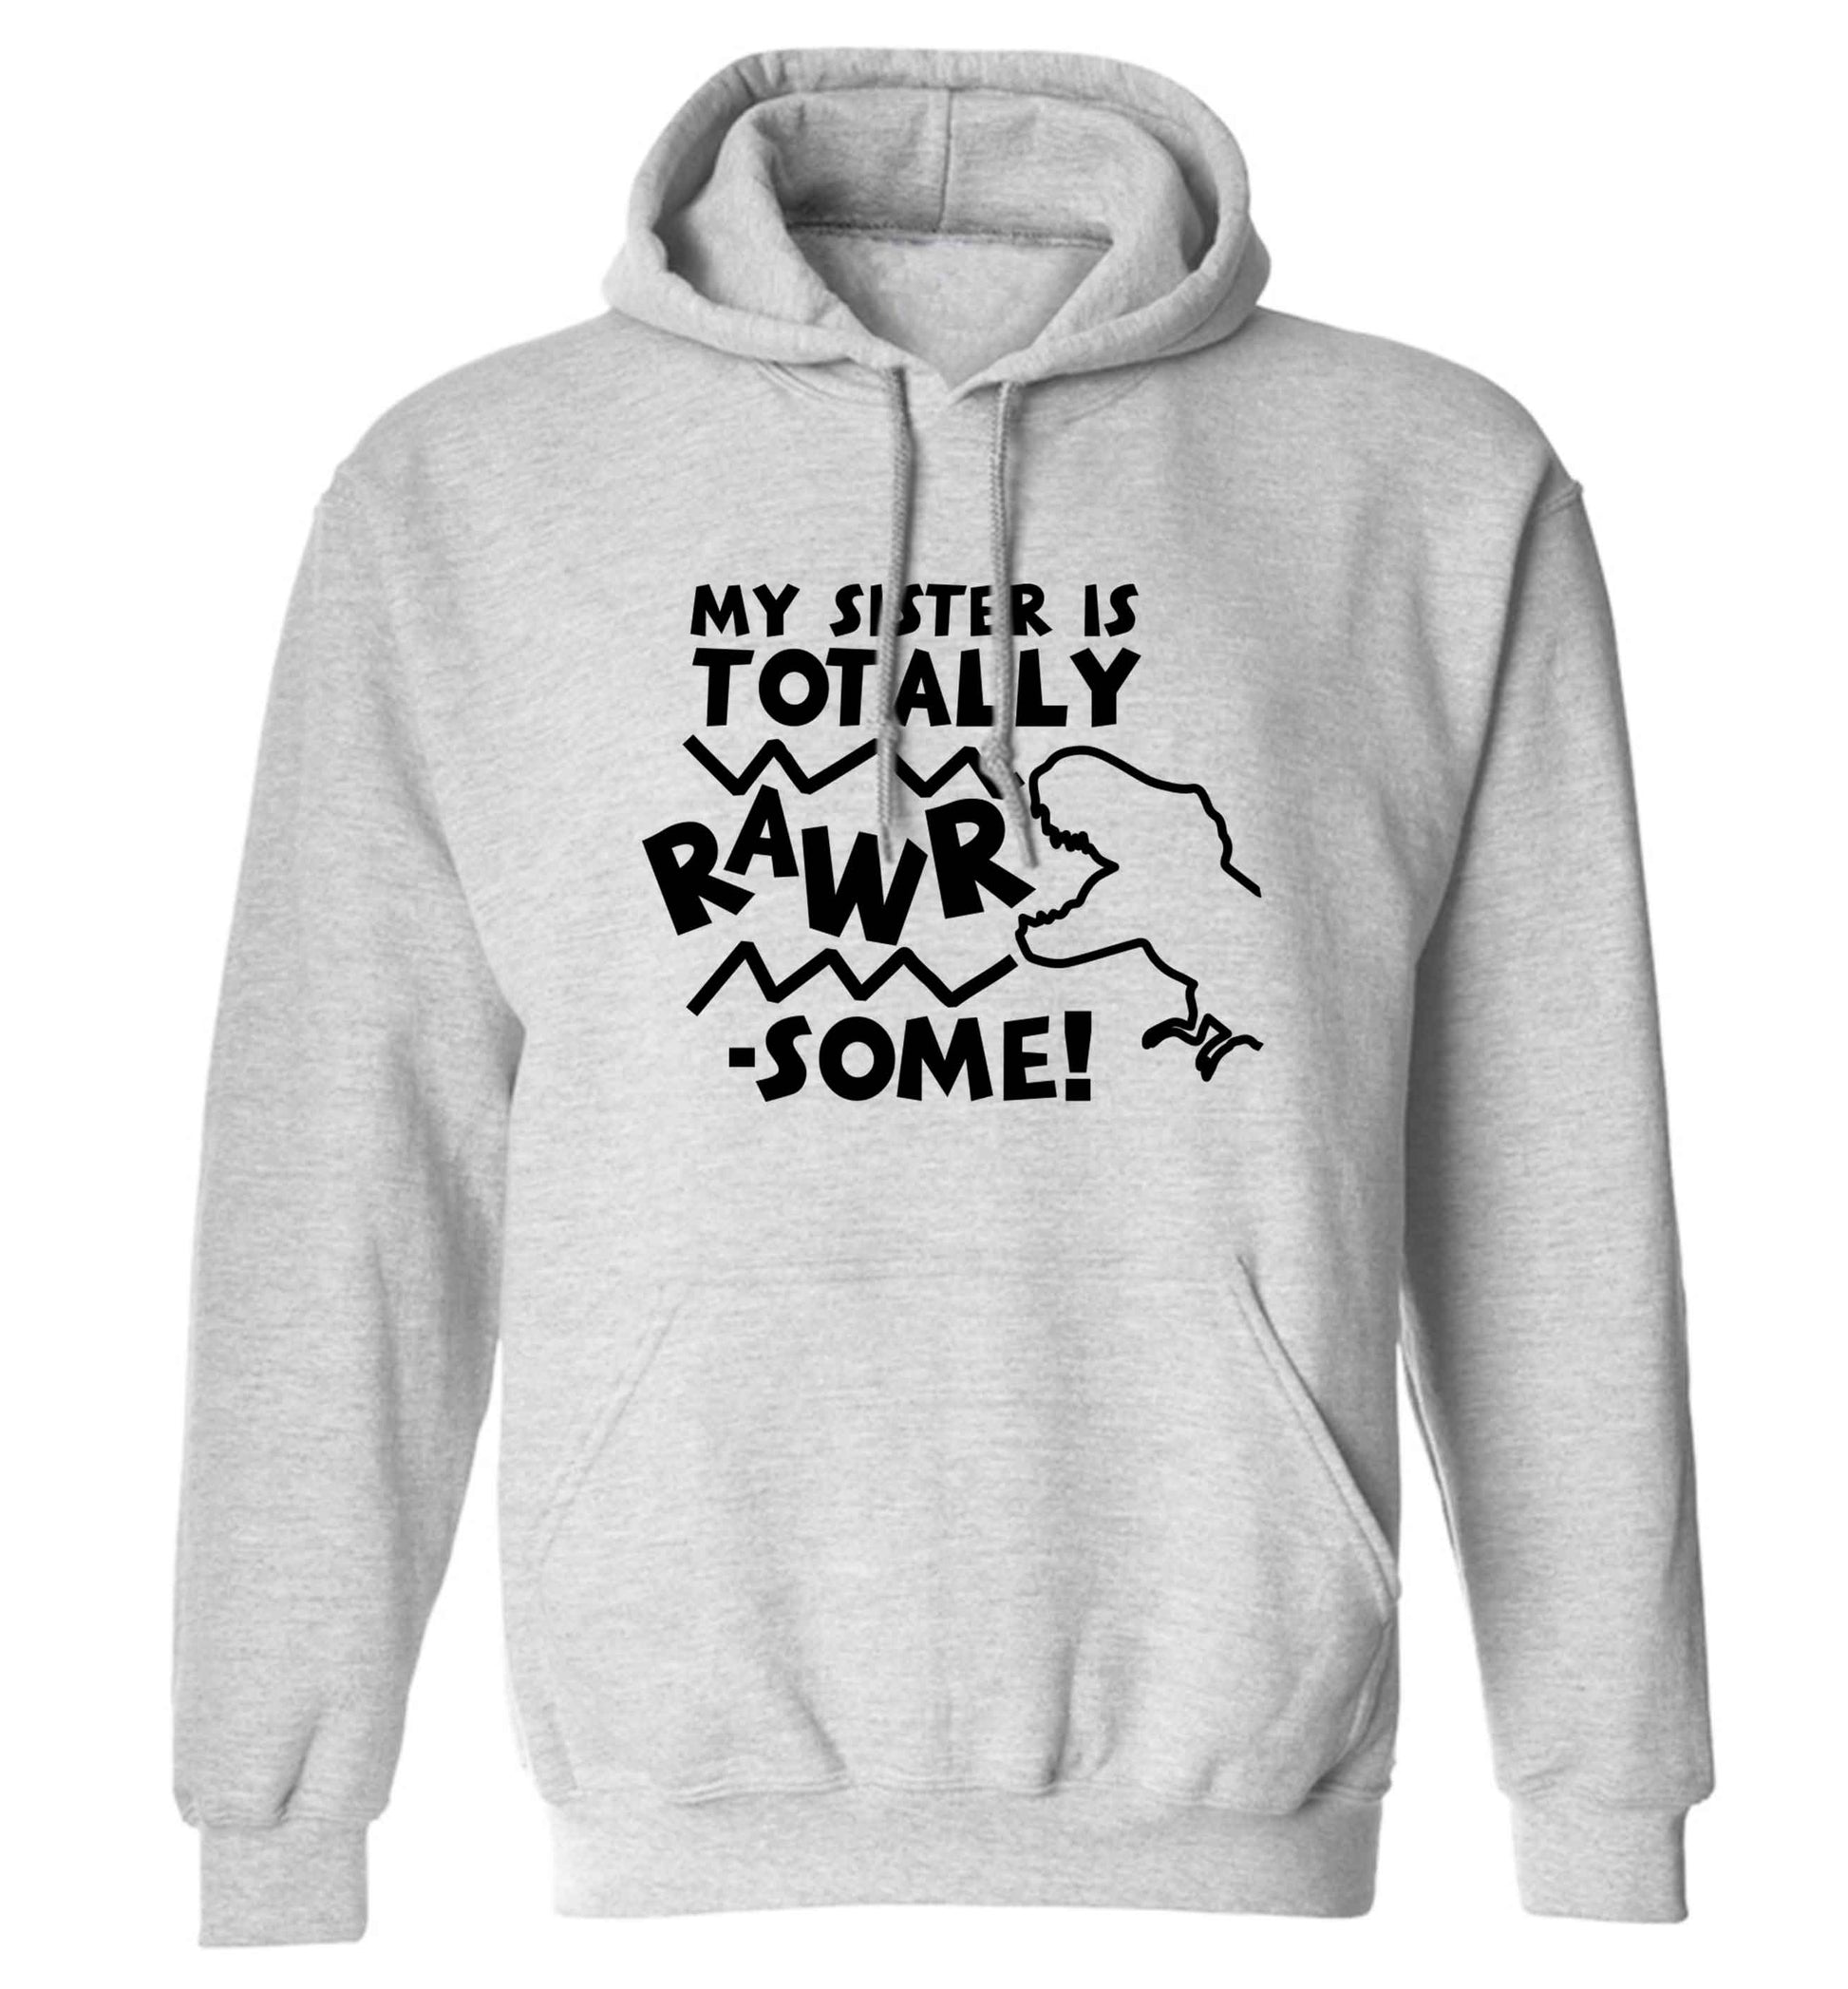 My sister is totally rawrsome adults unisex grey hoodie 2XL